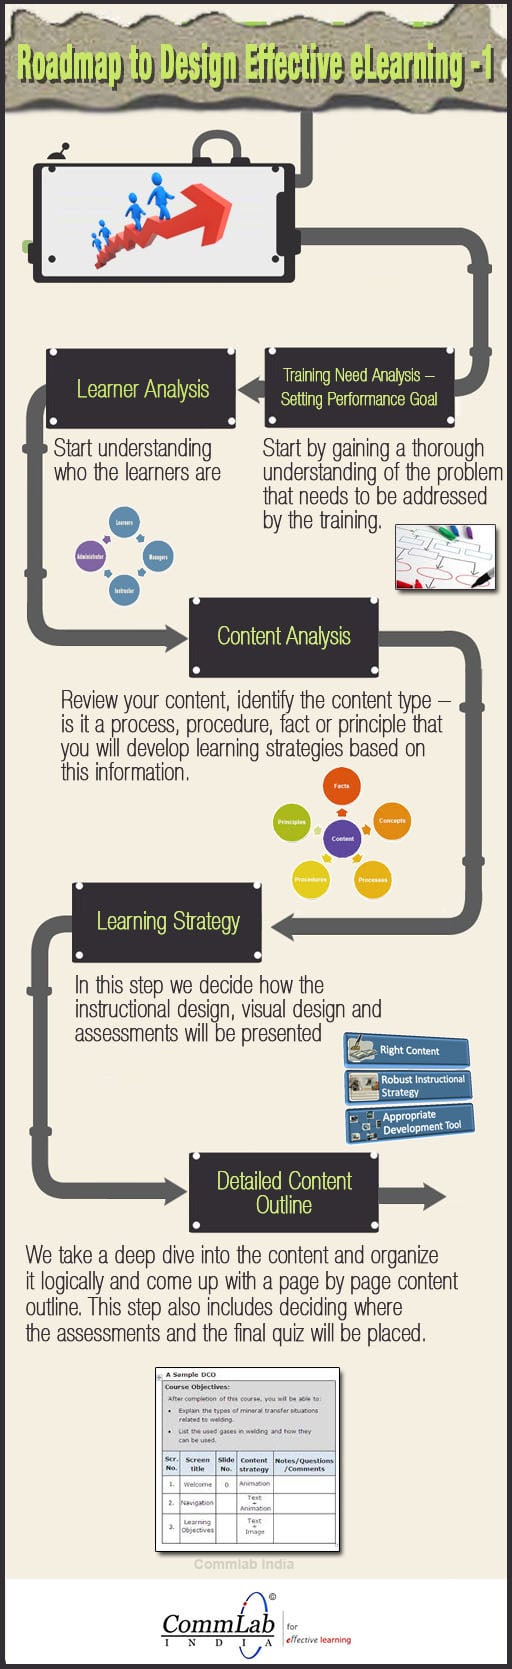 Roadmap To Design Effective eLearning Part1 - An Infographic